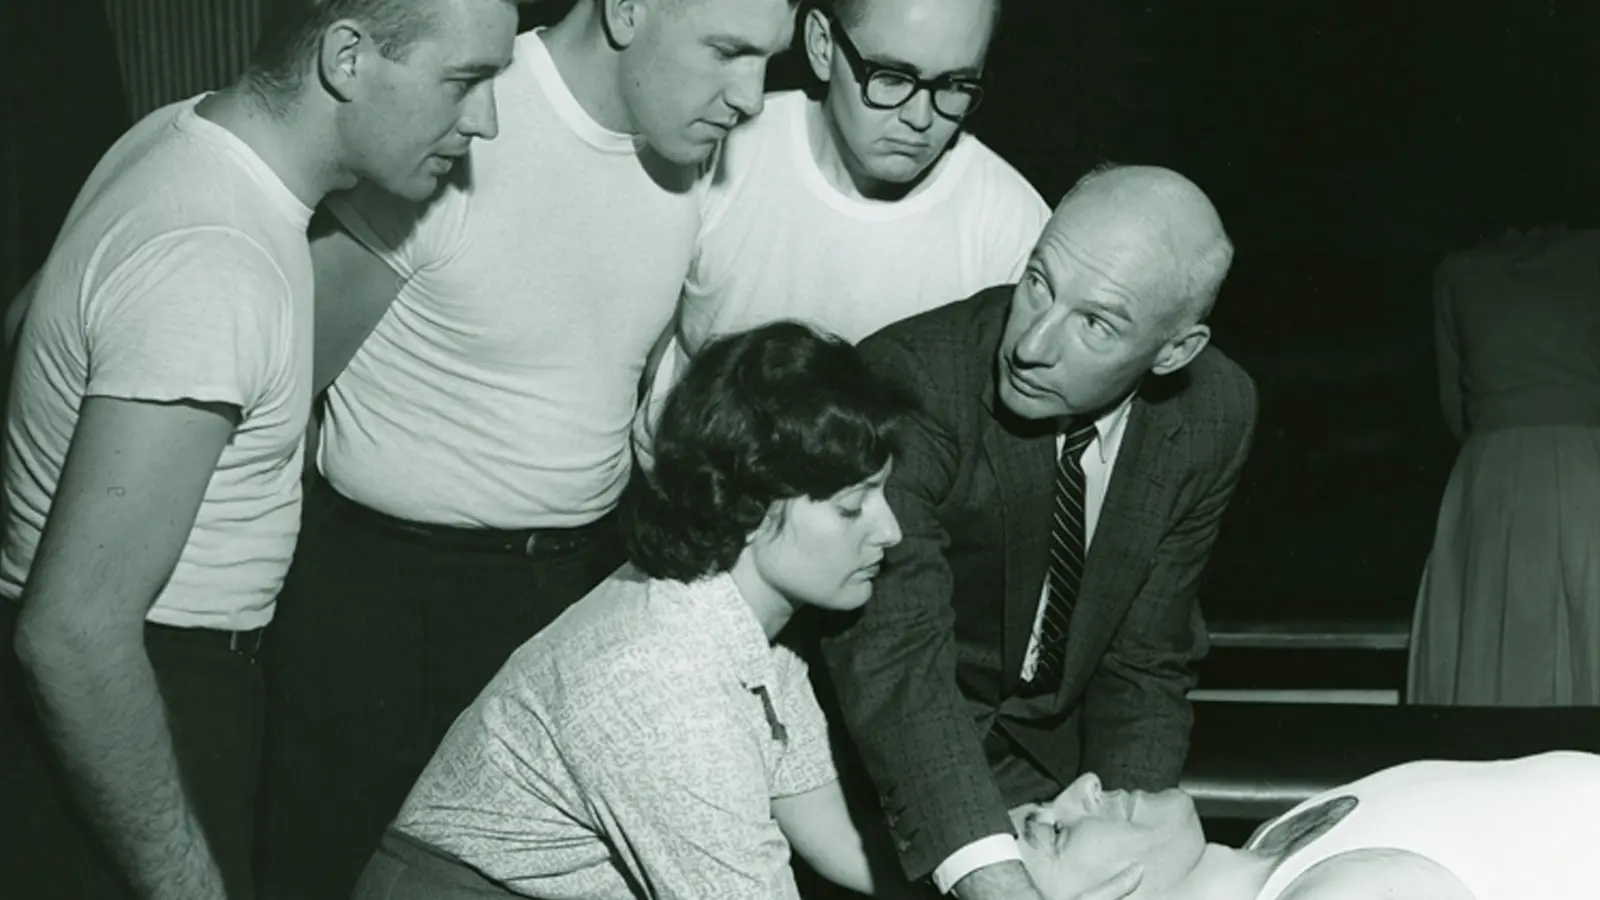 PCOM medical students learn from a faculty member during an OMM classroom session in the 1960s